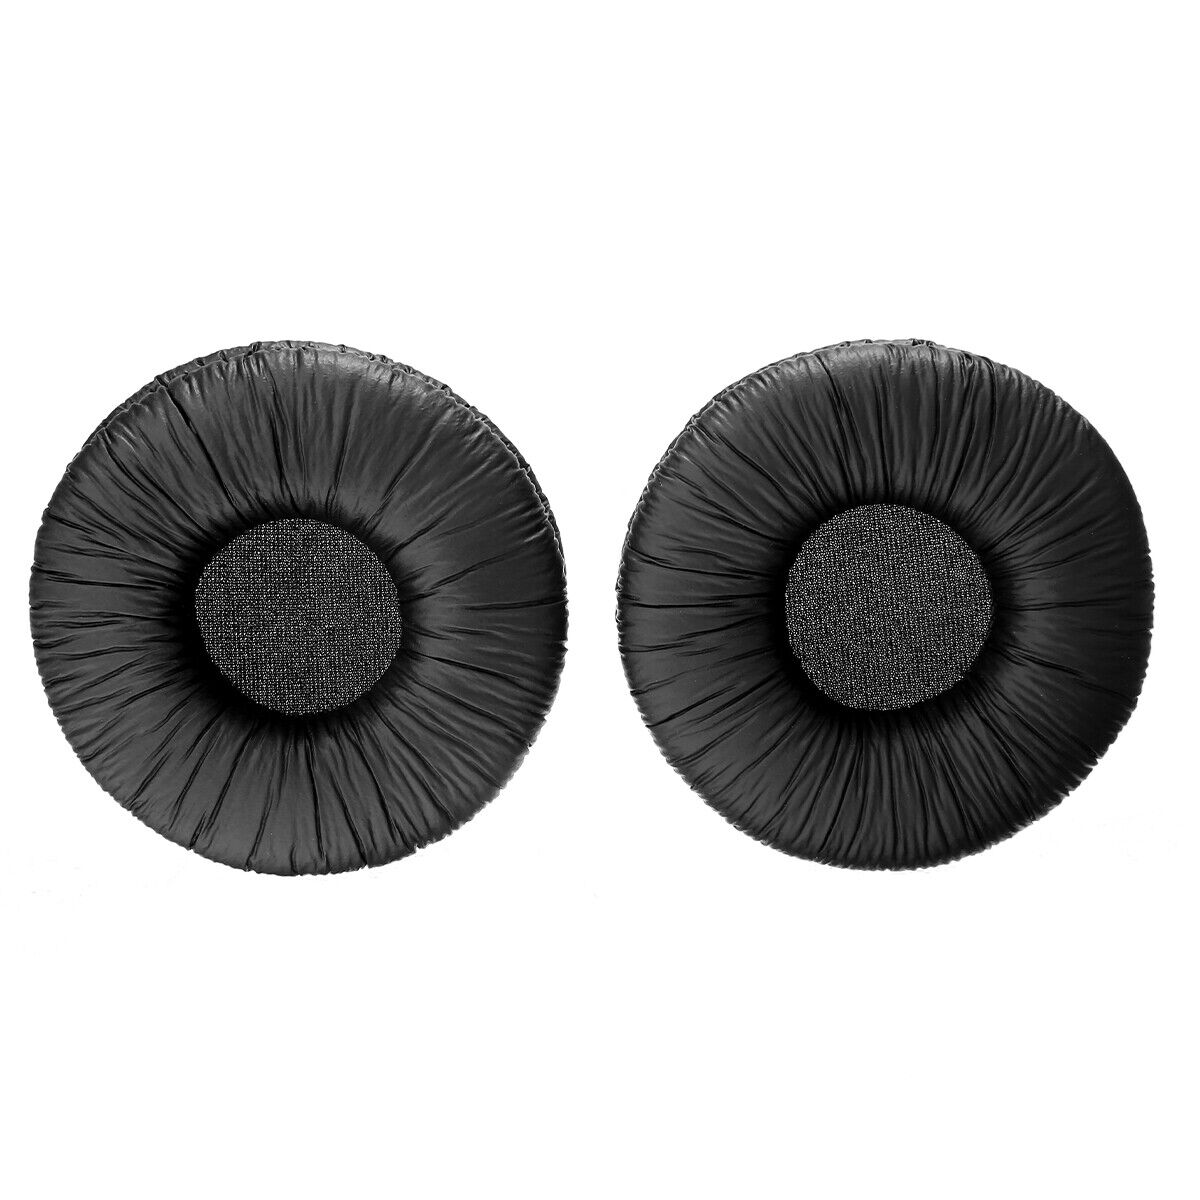 Ear Pads Set compatible with Sennheiser HD25 Headphones Replacements